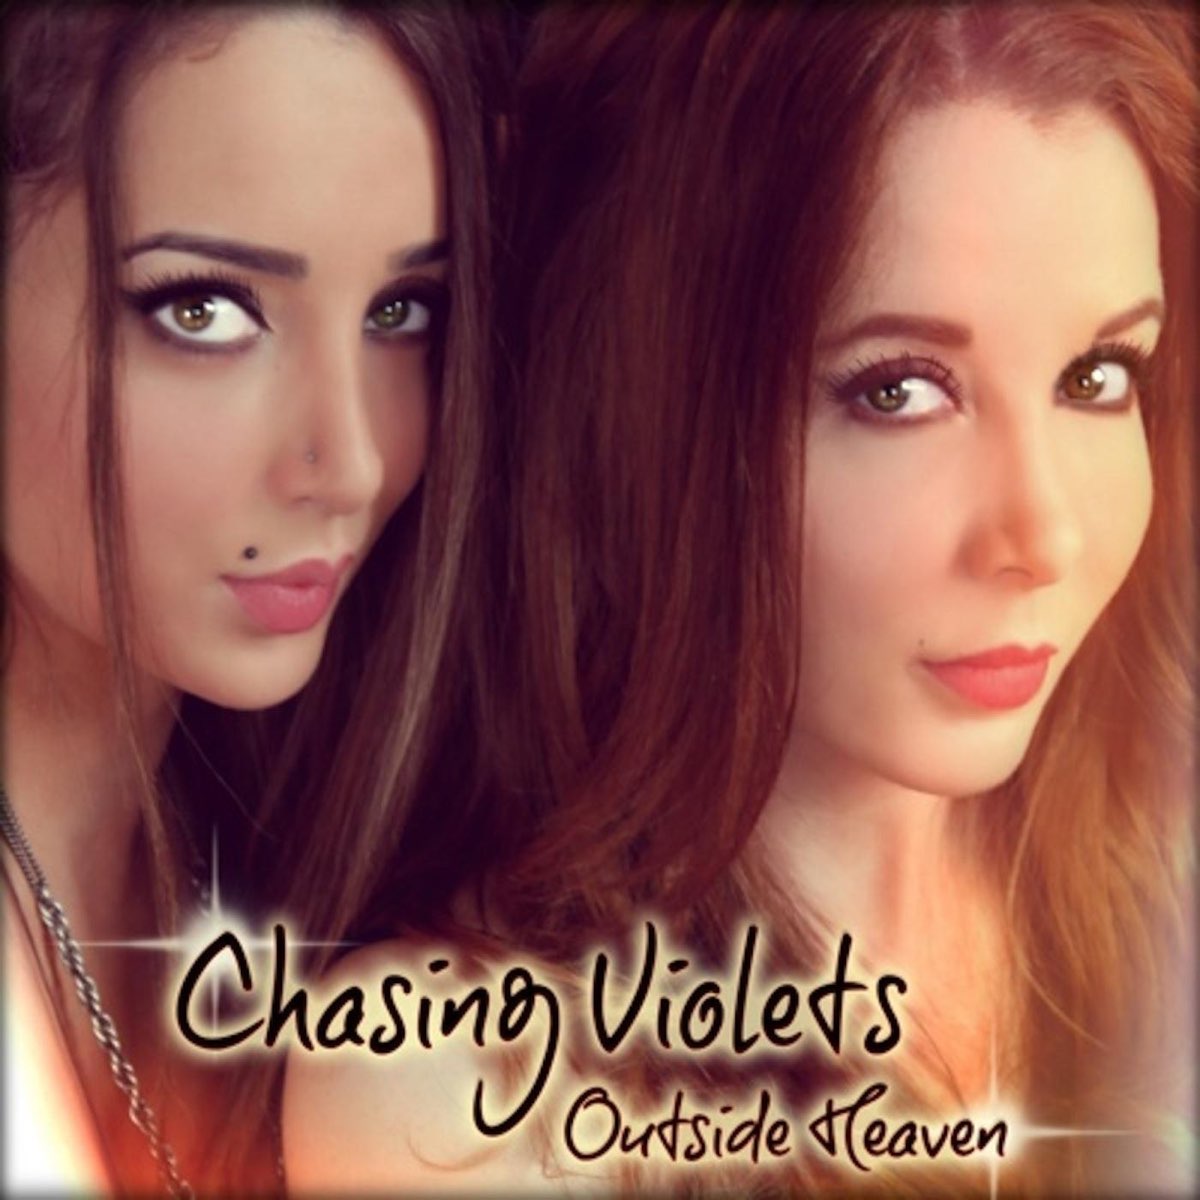 French sisters. Chasing Violets - outside Heaven. Chasing Violets - 2012 - outside Heaven. Chasing Violets группа. Chasing Violets - Jade Hearts.